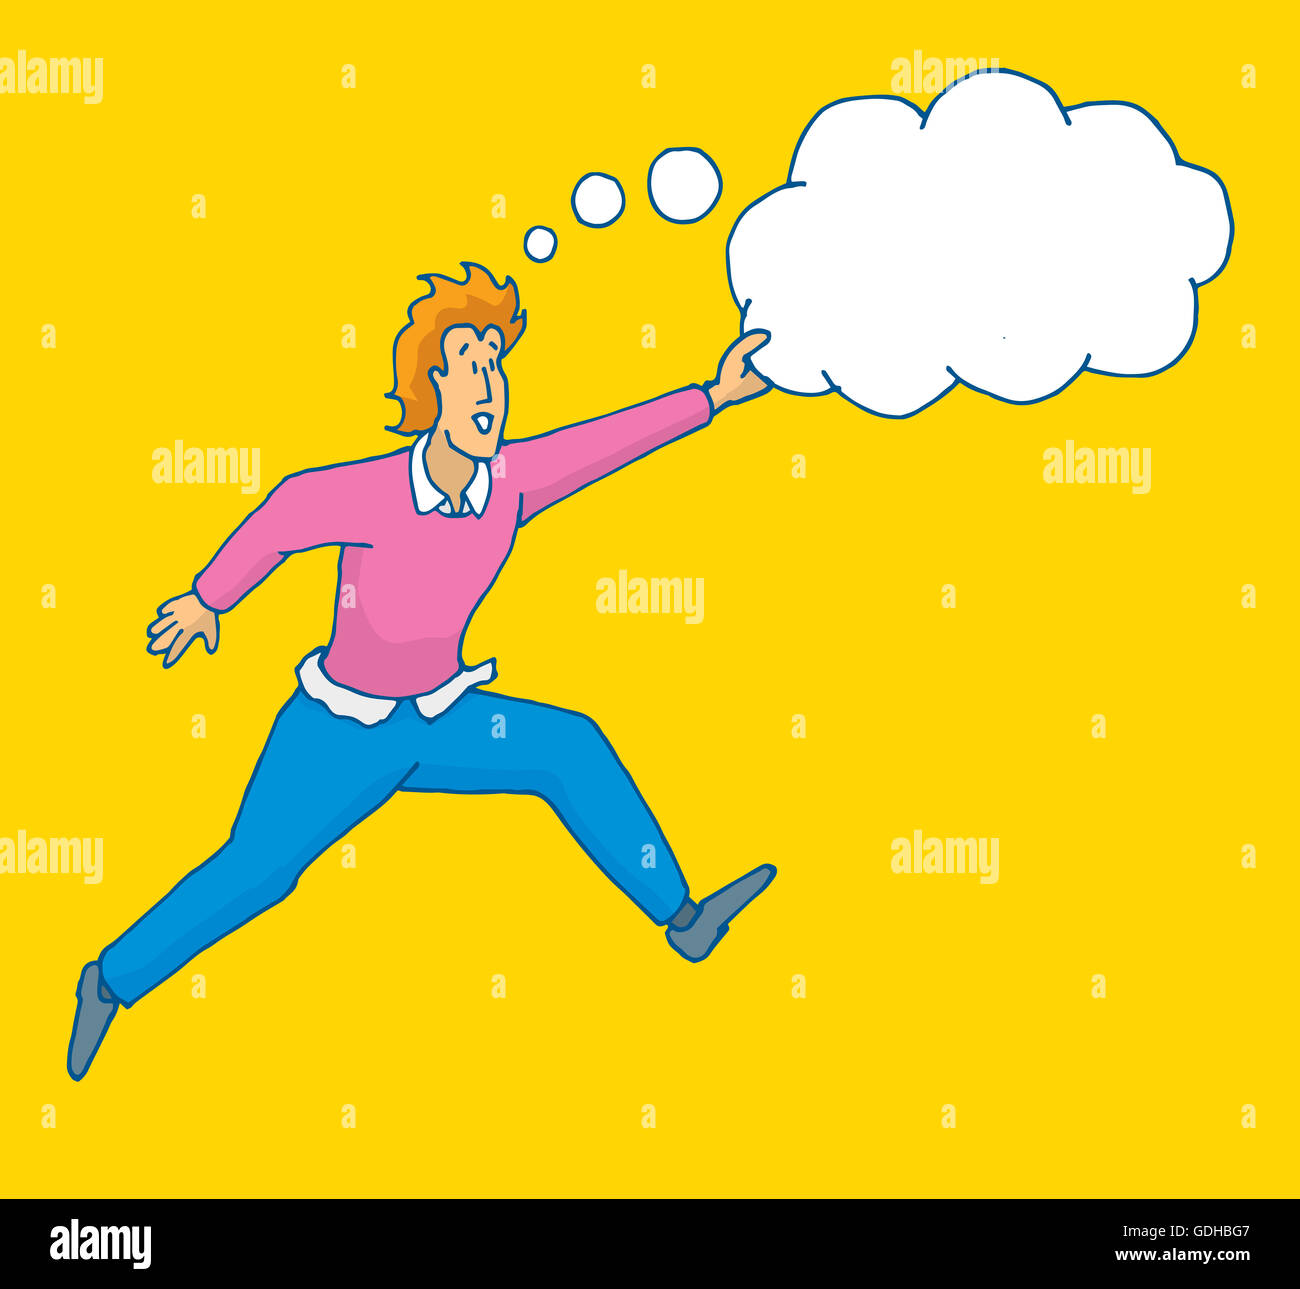 Cartoon illustration of brave man jumping catching his dreams or thoughts Stock Photo